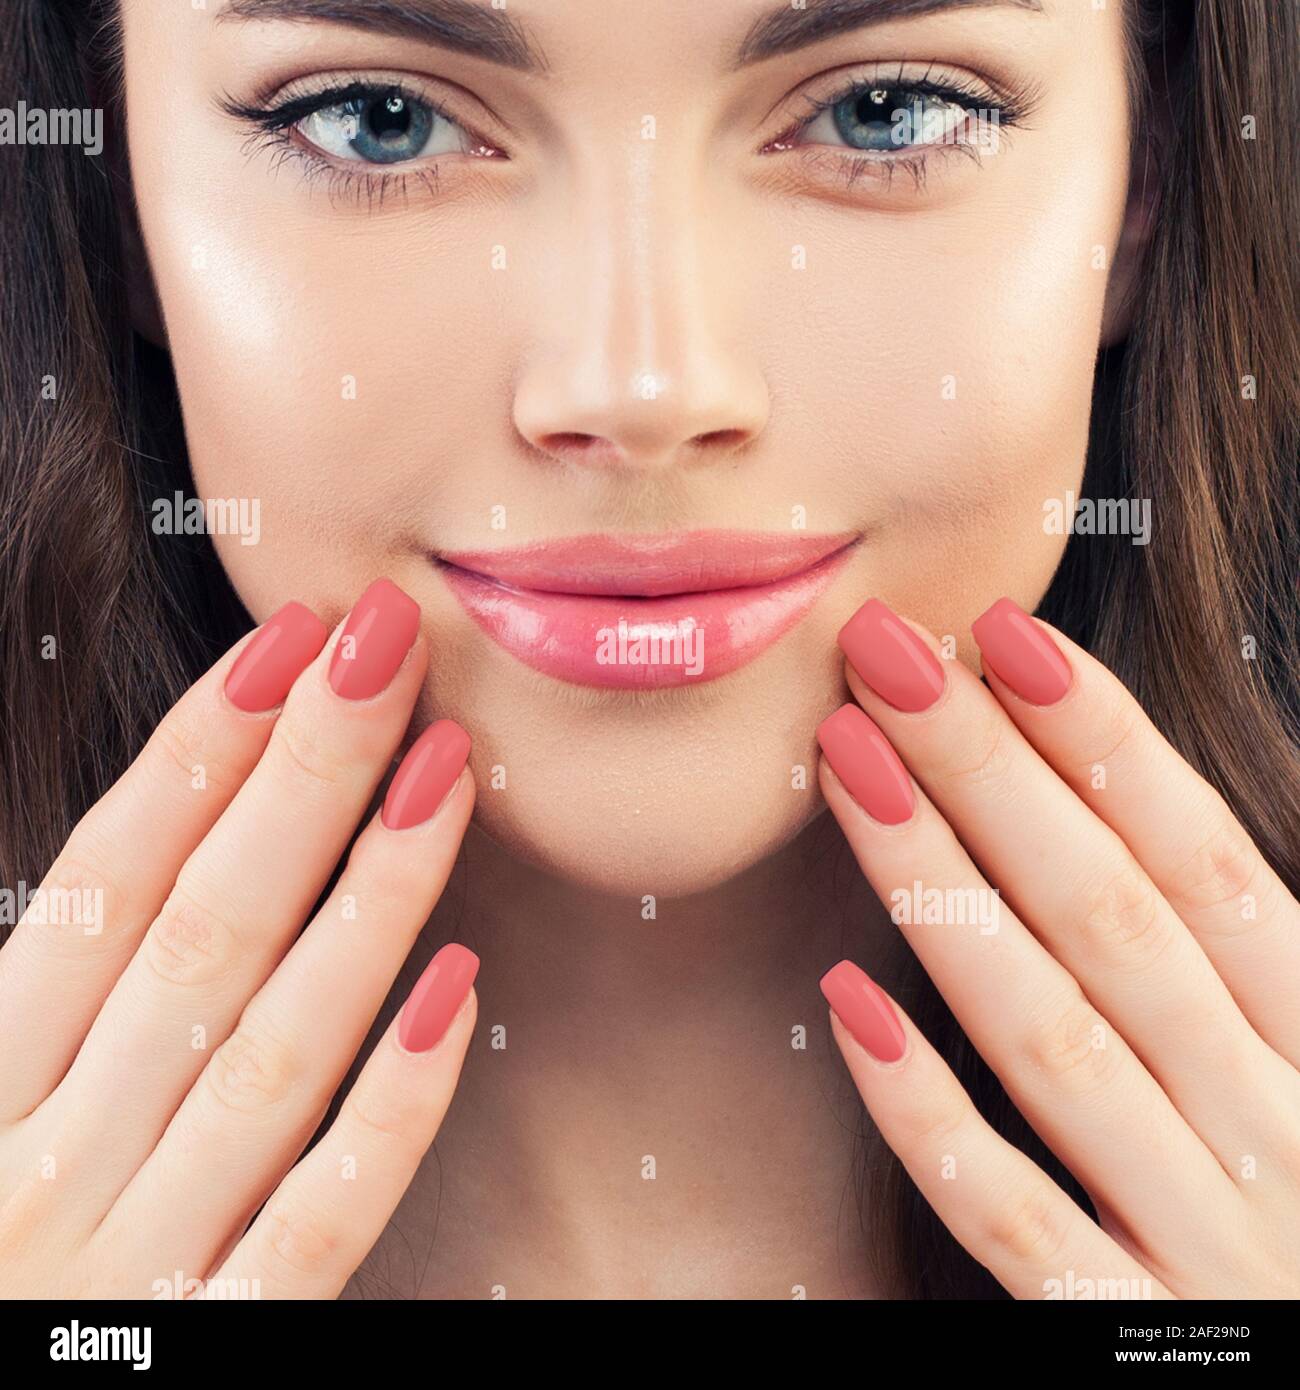 Female hand with manicured nails. Pink lips makeup and pink nailpolish, beauty manicure concept Stock Photo